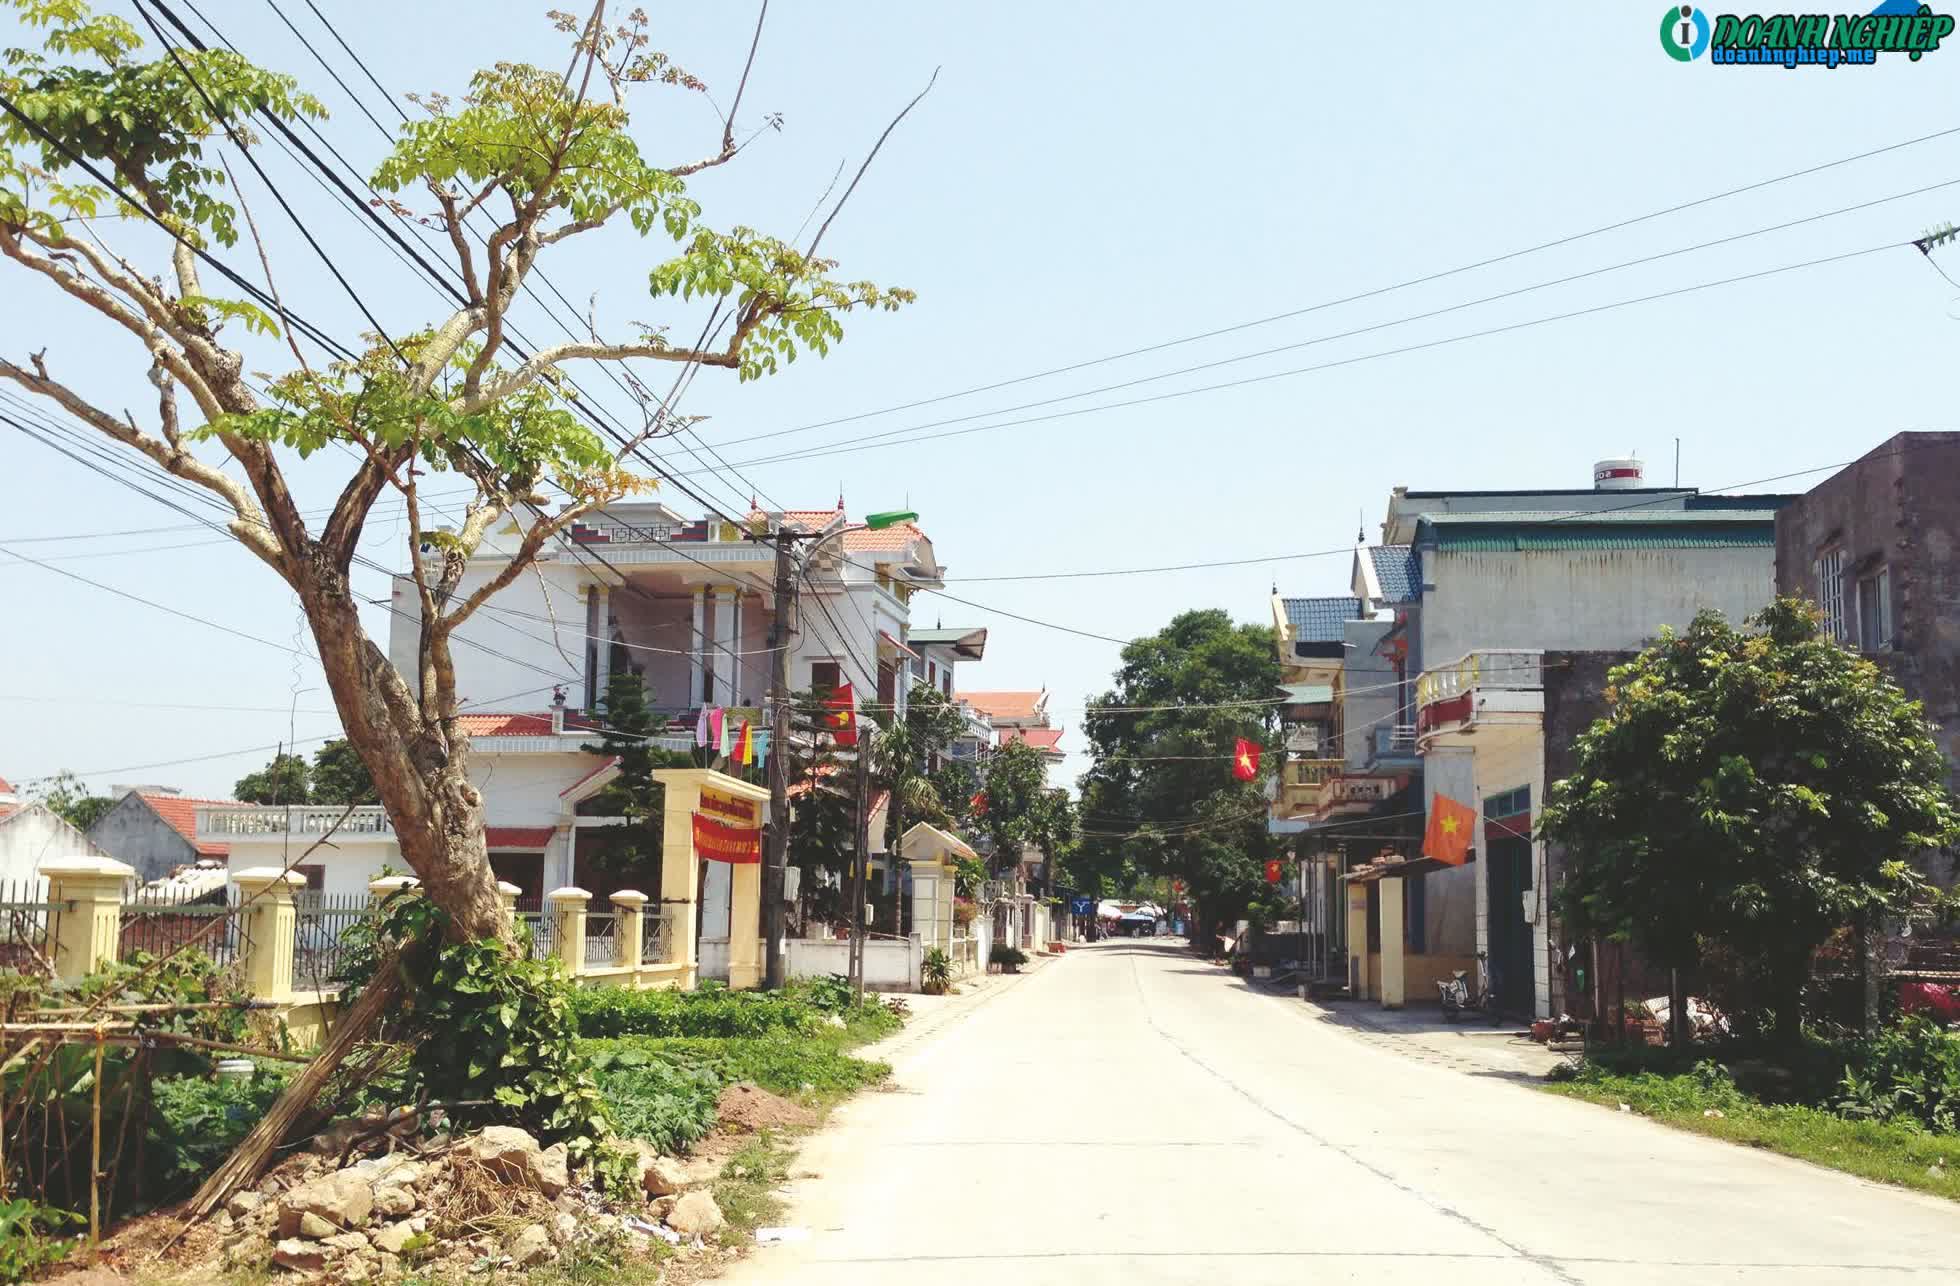 Image of List companies in Hai Xuan Commune- Mong Cai City- Quang Ninh